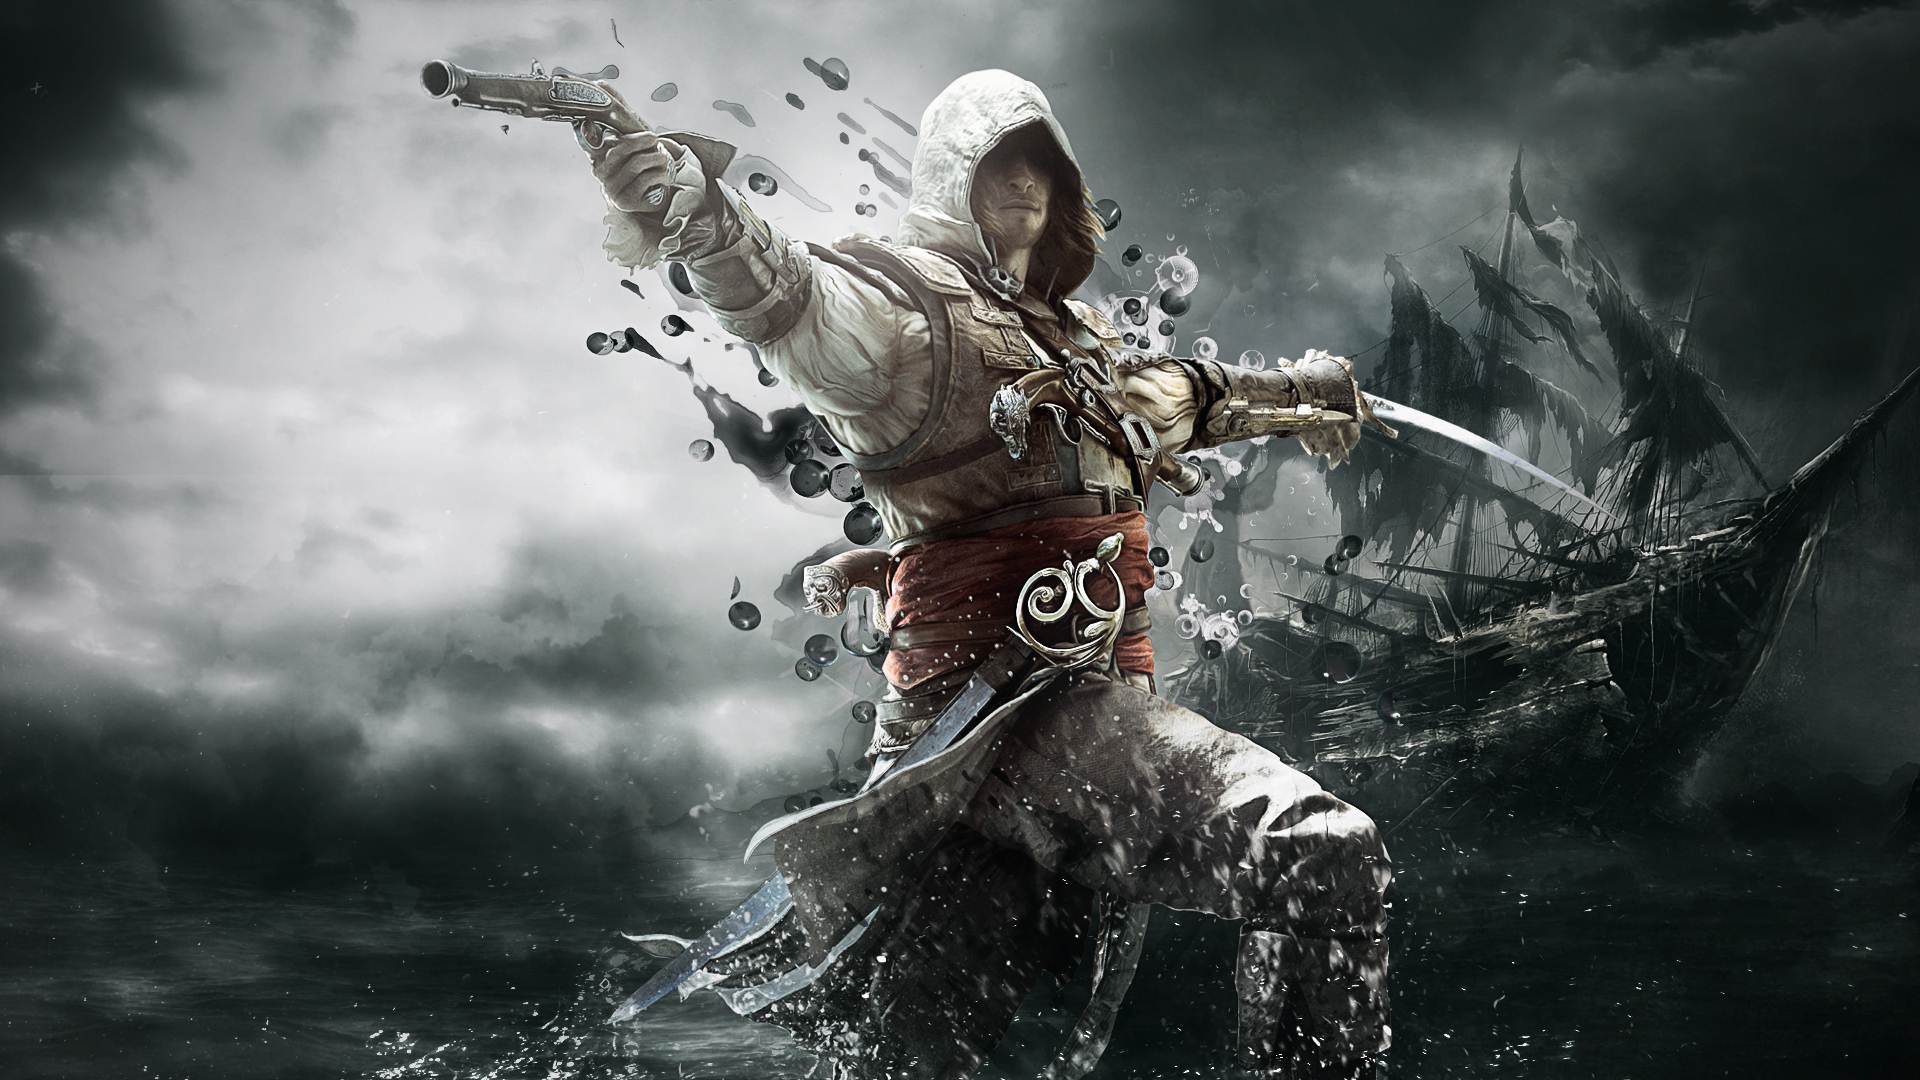 Assassins Creed wallpapers HDparte